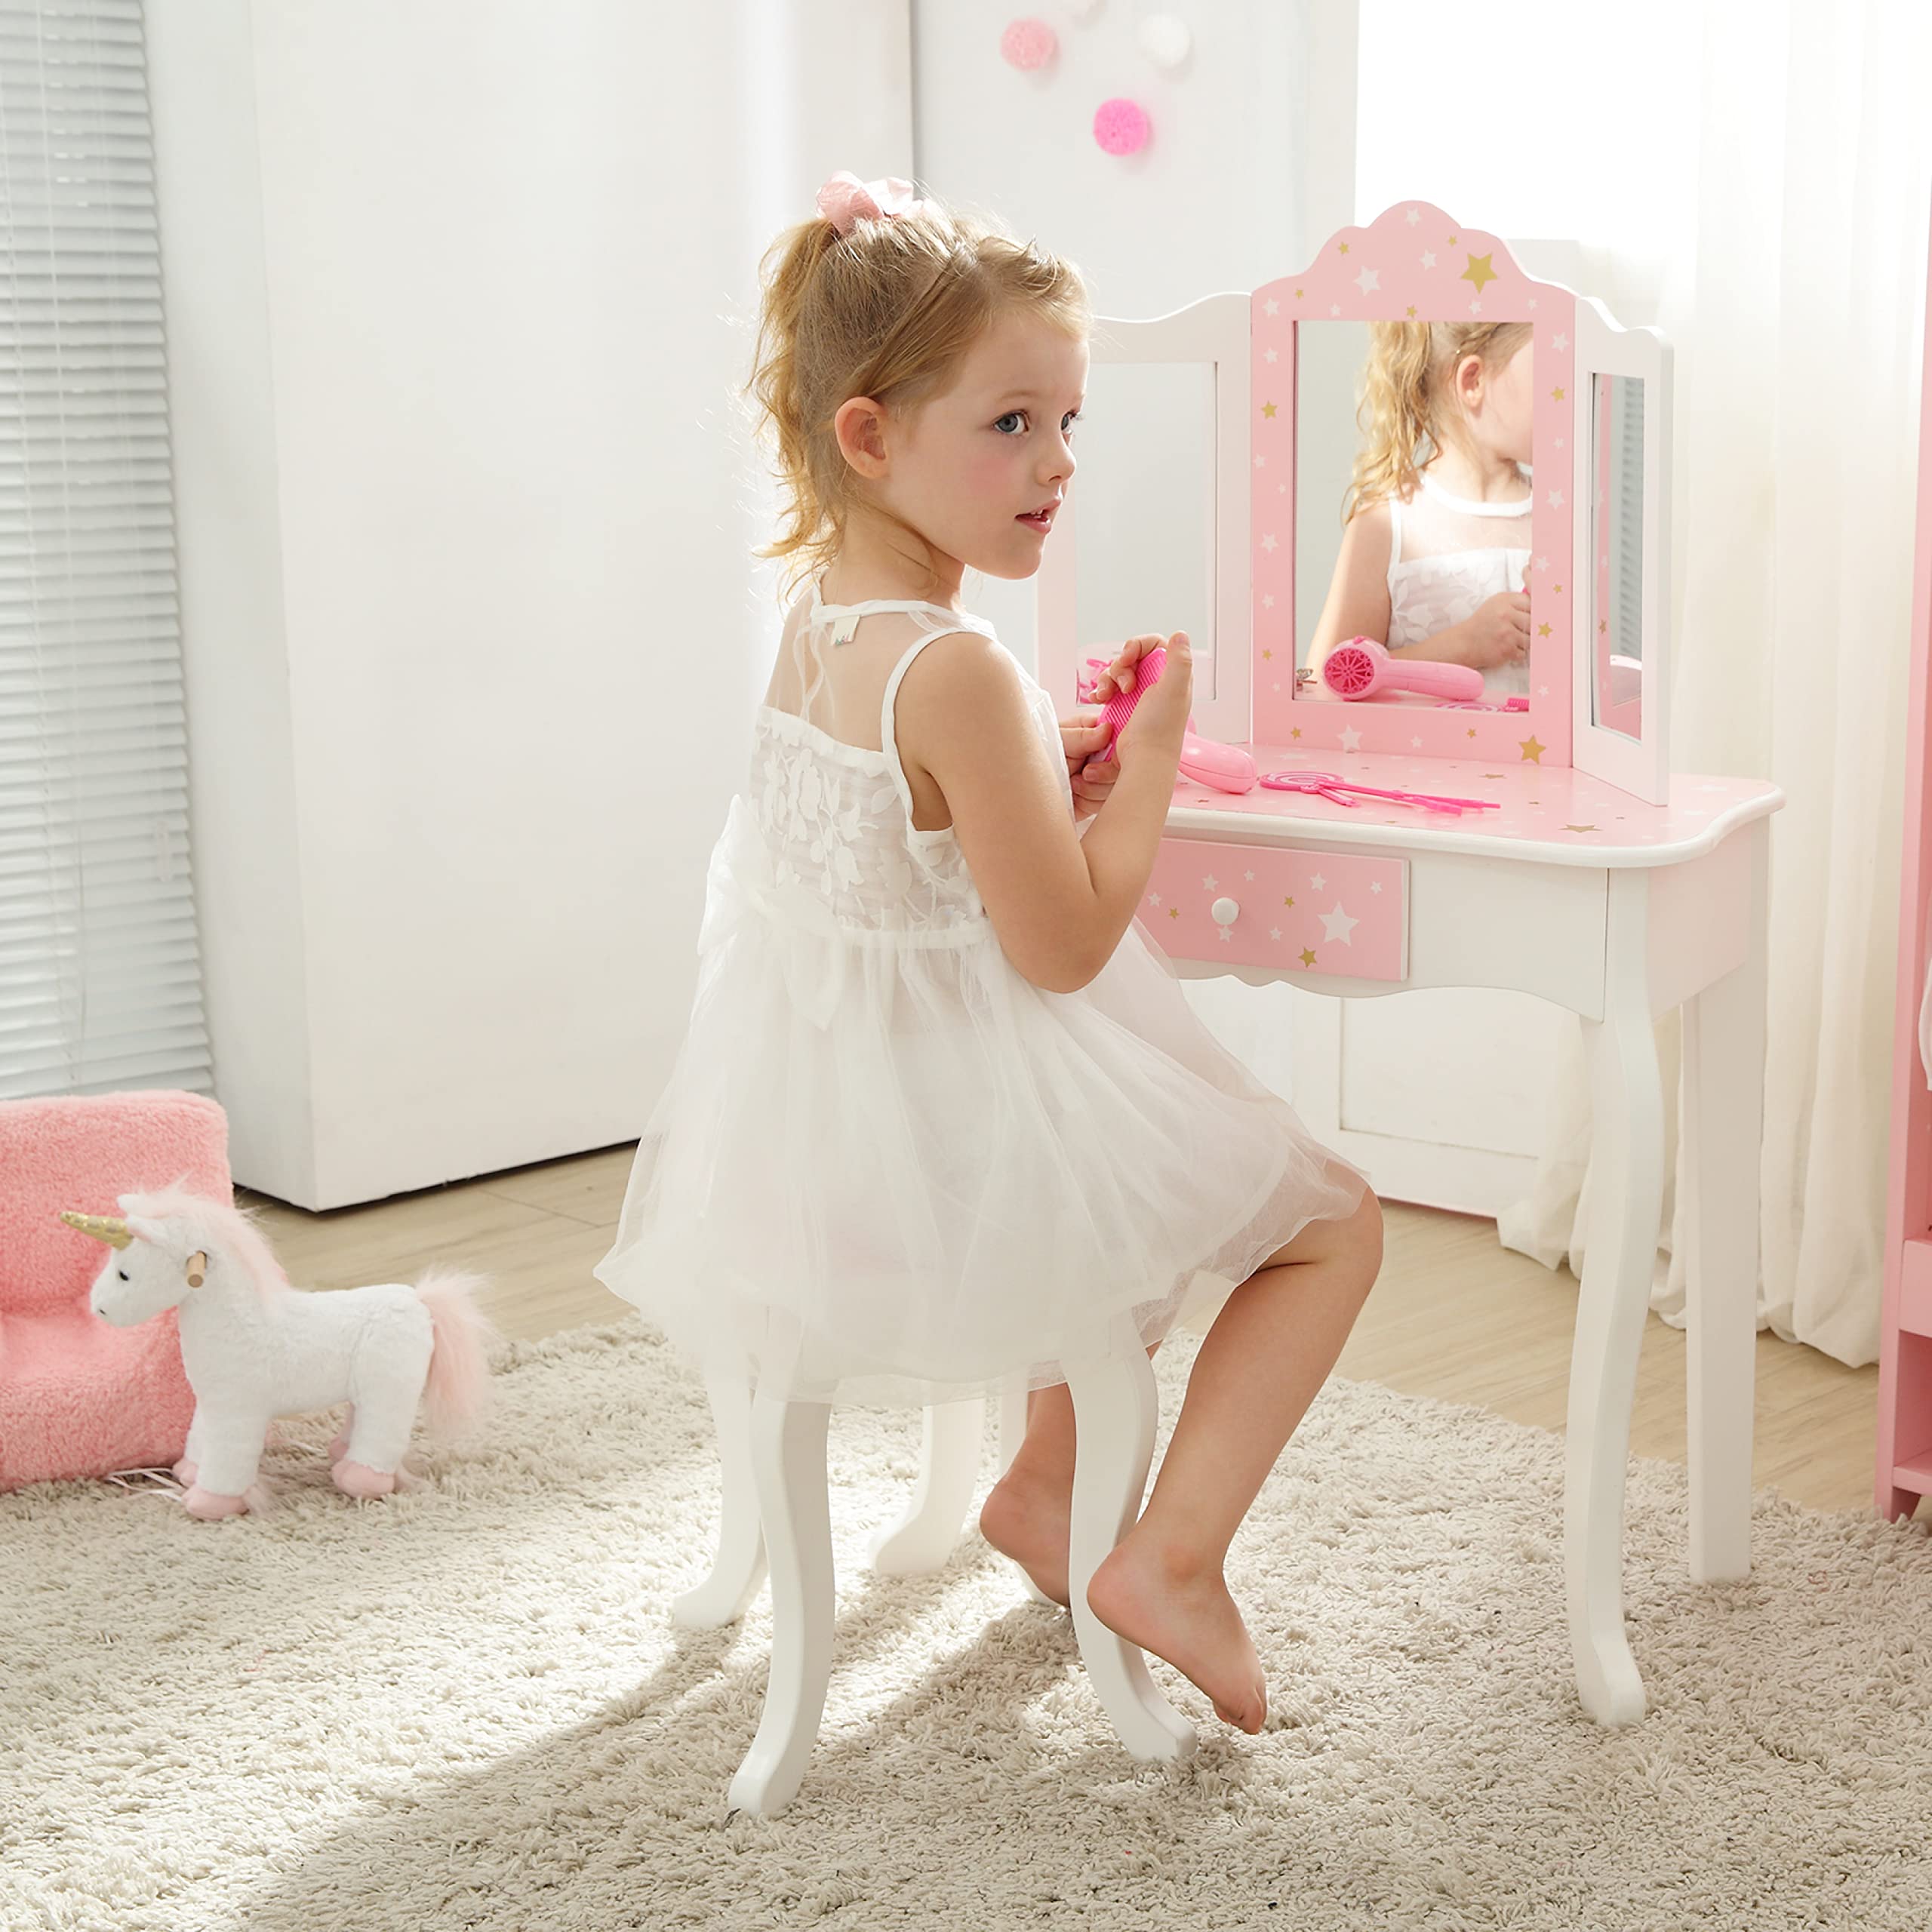 Teamson Kids Pretend Play Kids Vanity, Table & Chair Vanity Set with Mirror, Girls Makeup Dressing Table with Storage Drawer & Twinkle Stars Print, Gisele Collection, Pink/White